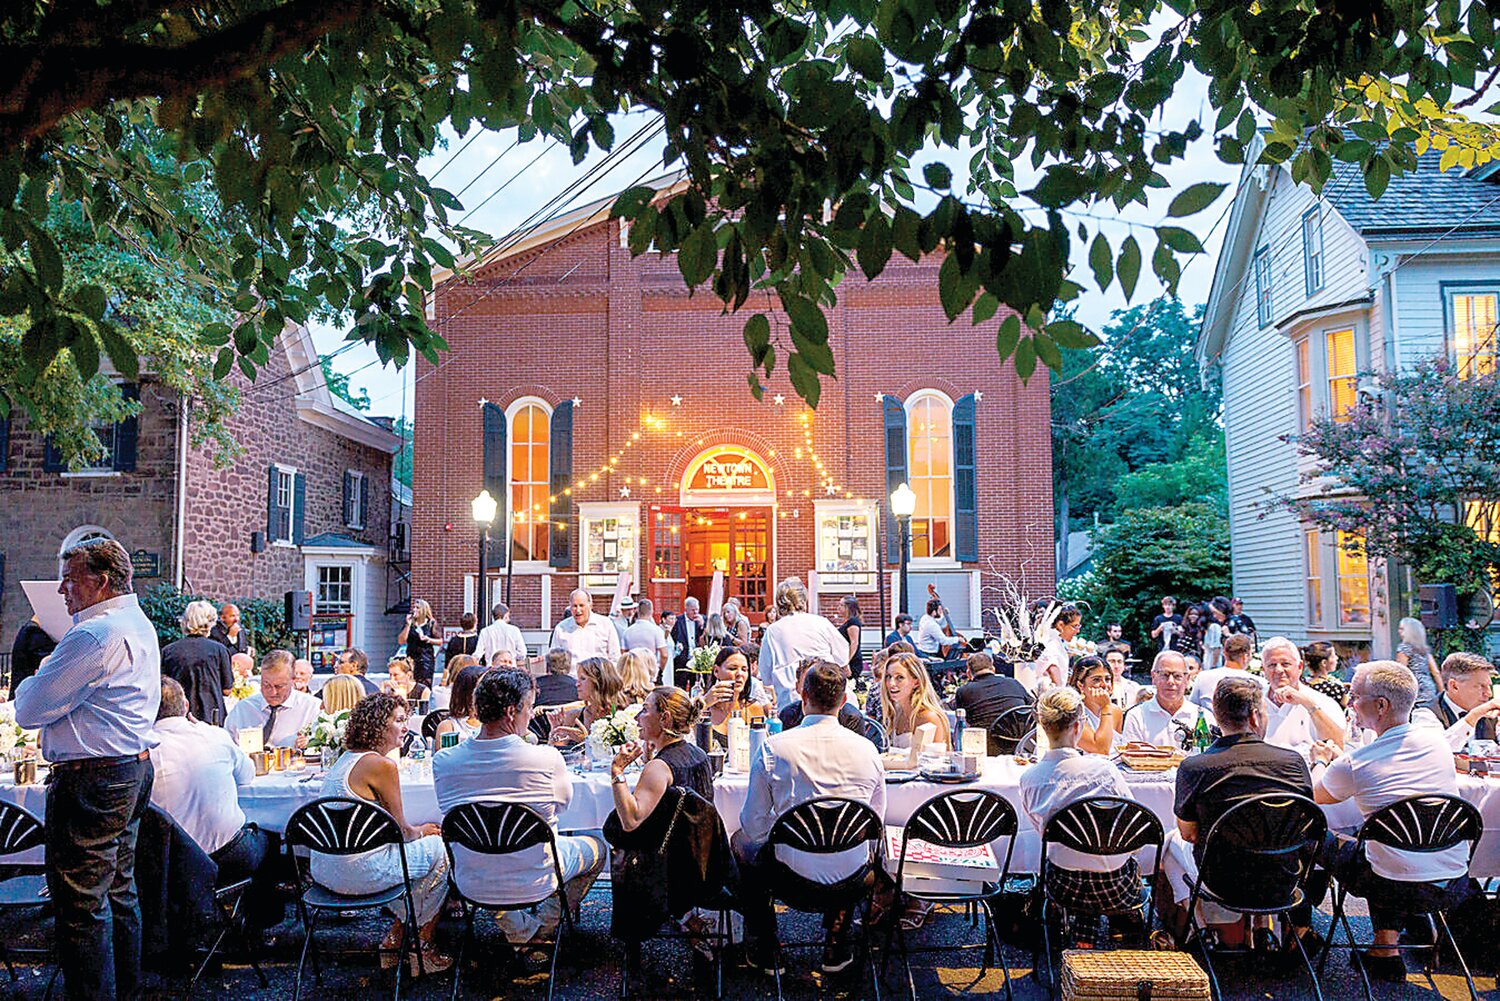 The annual Newtown Black & White Dinner is a one-of-a-kind alfresco picnic held in the middle of the street to benefit the historic Newtown Theatre.